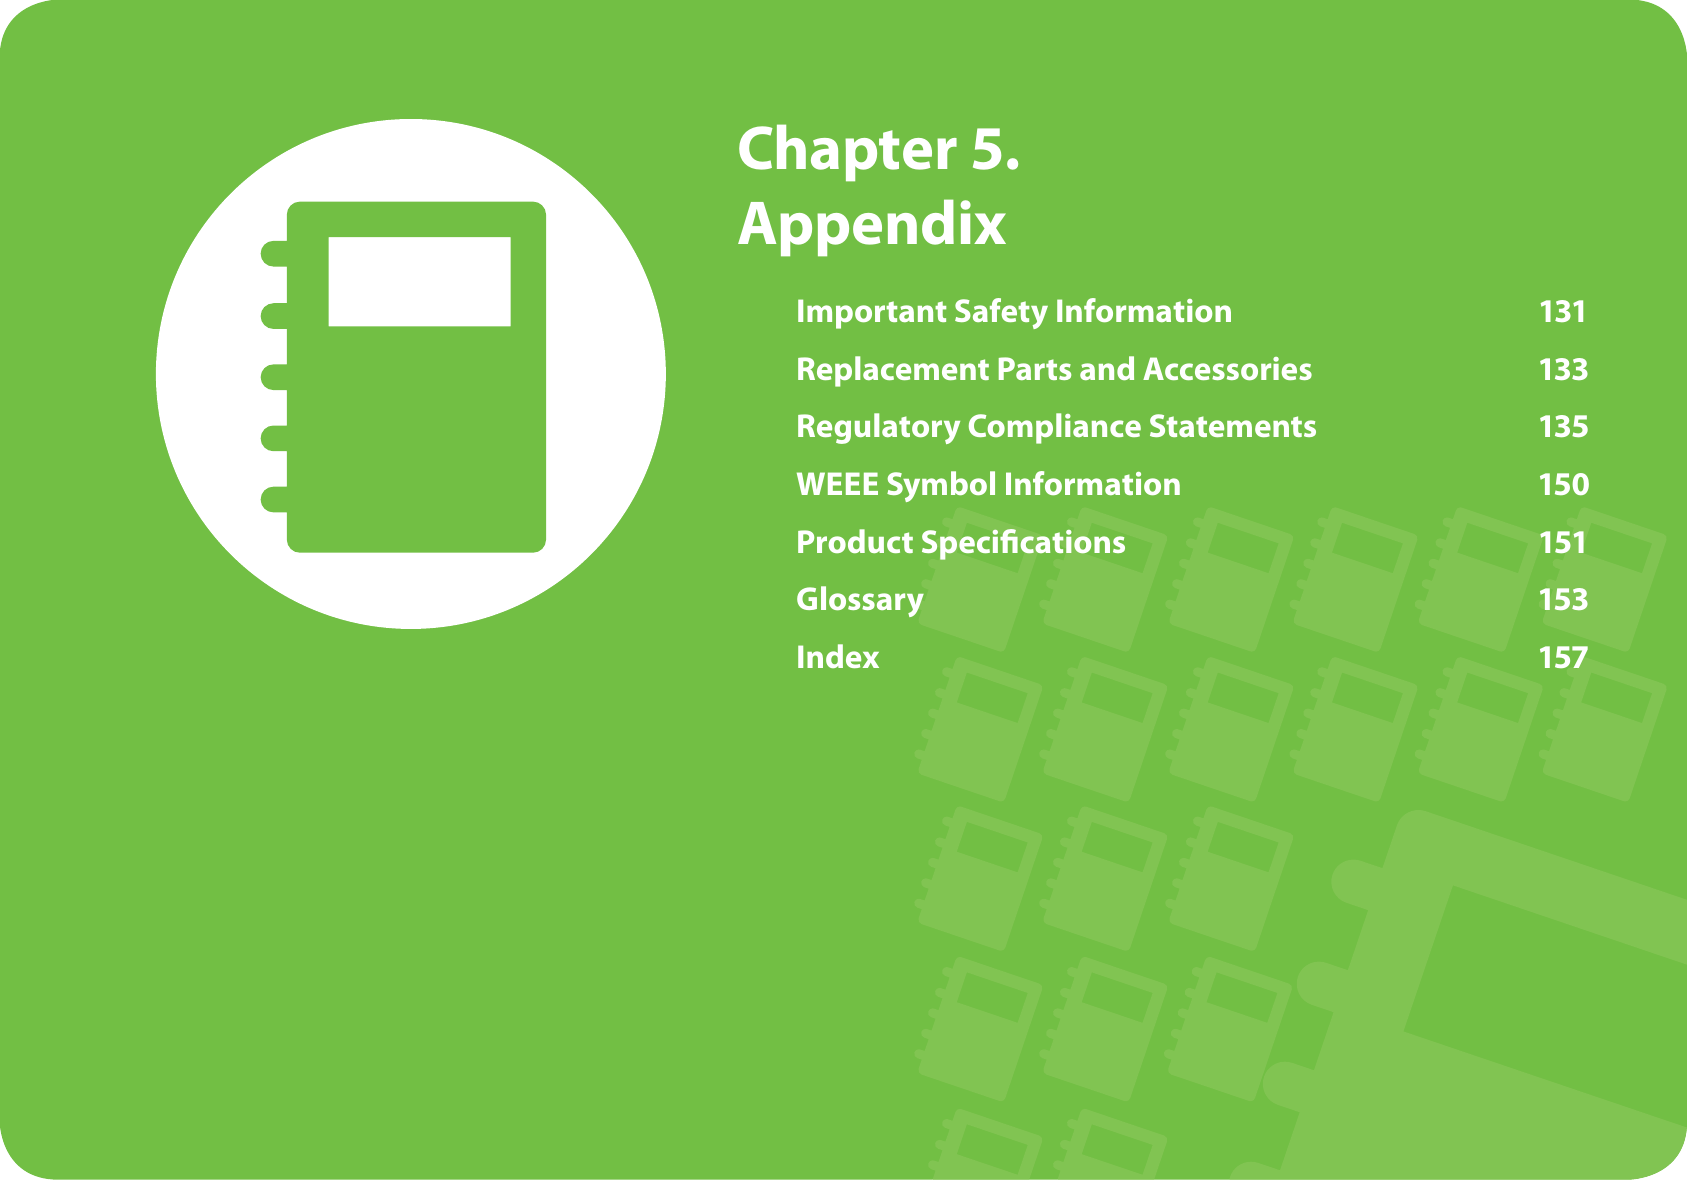  Chapter  5. AppendixImportant Safety Information  131Replacement Parts and Accessories  133Regulatory Compliance Statements  135WEEE Symbol Information  150Product Speciﬁ cations  151Glossary 153Index 157